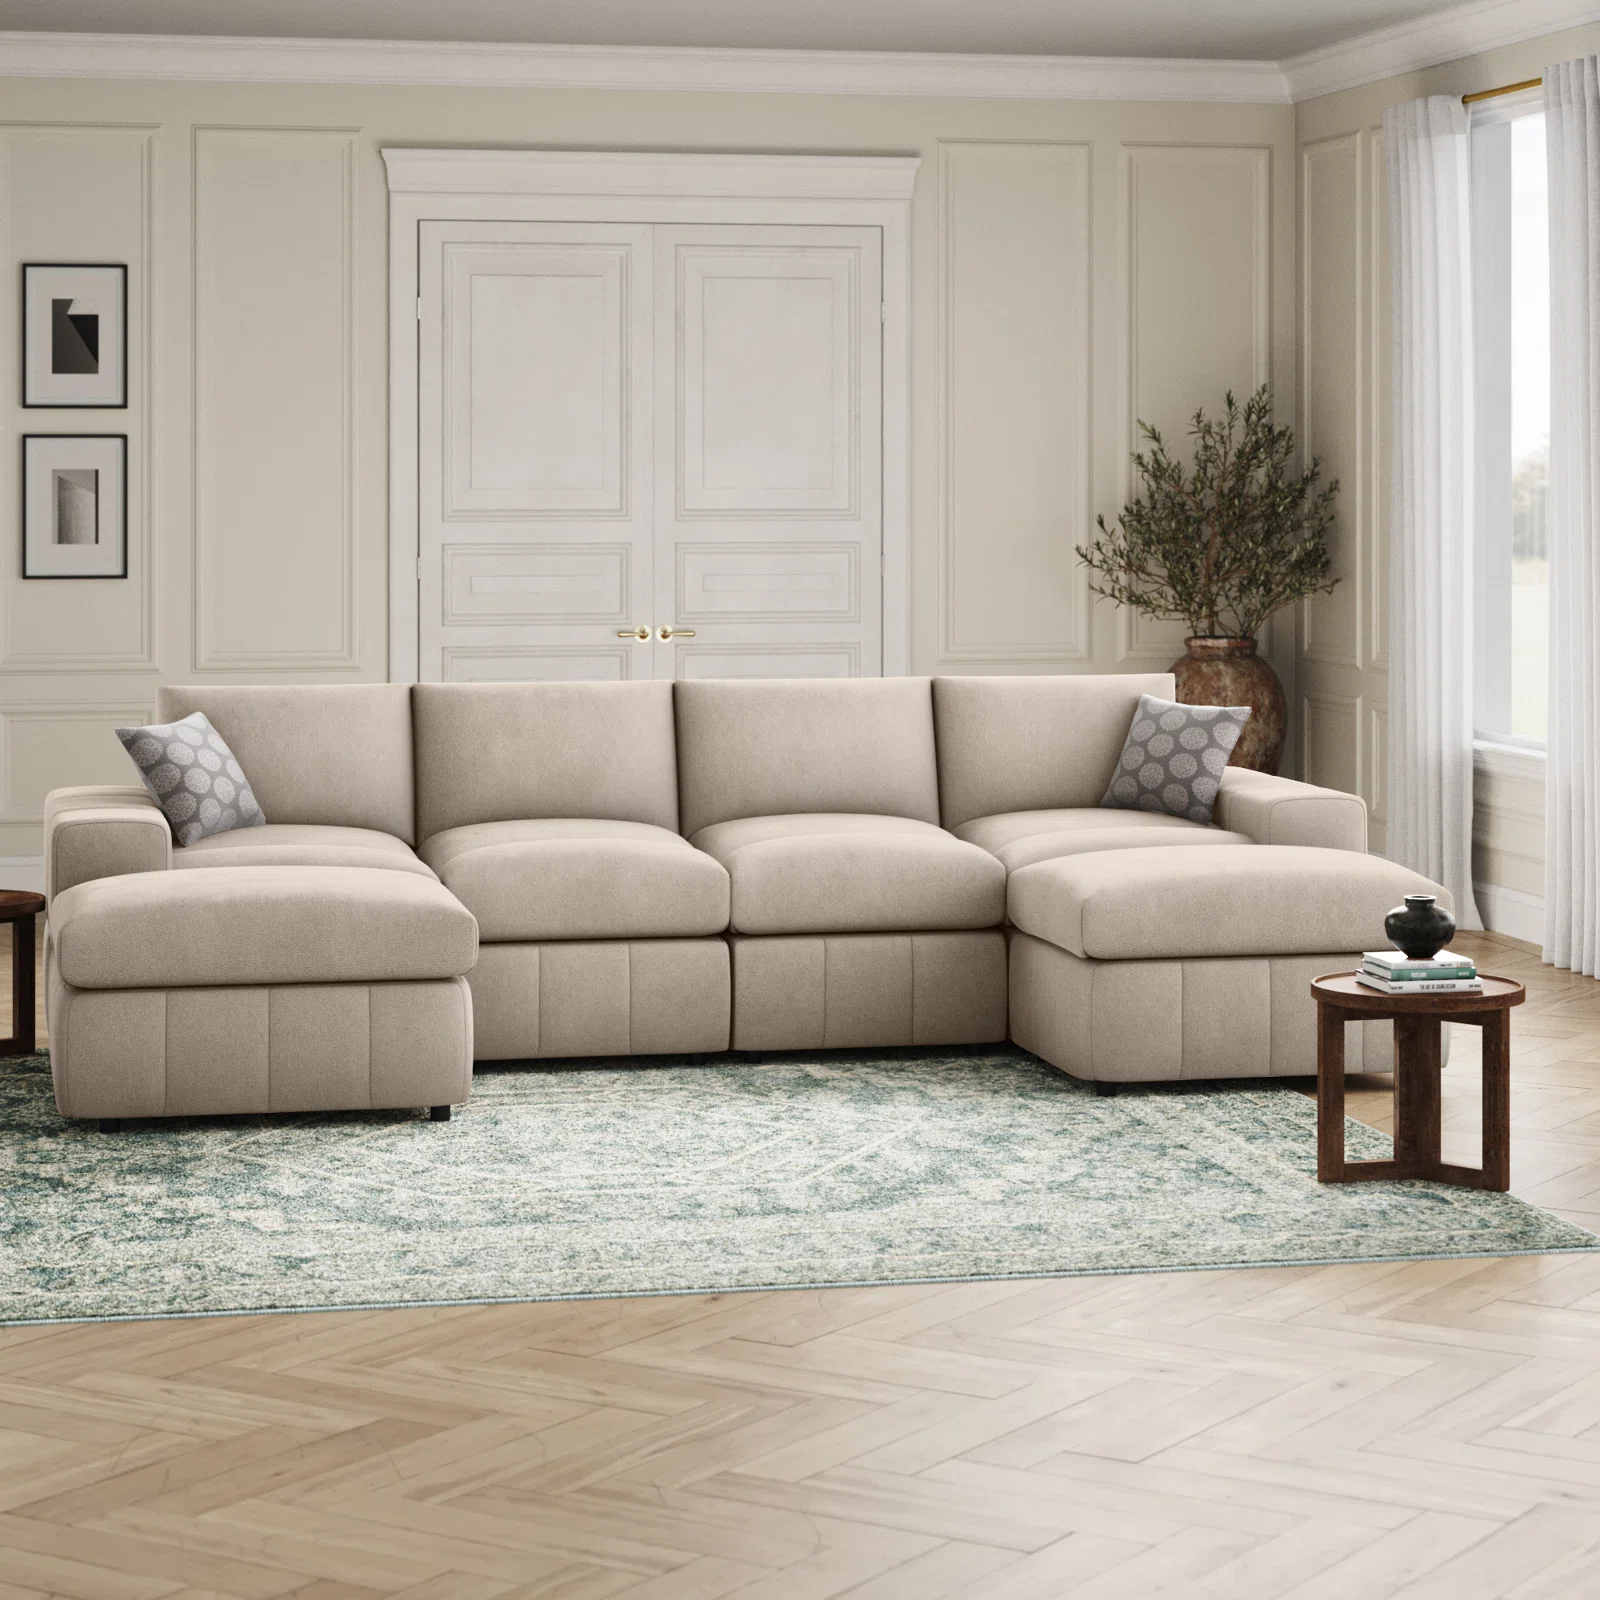 Kelly Modular Couch - Lifestyle Home